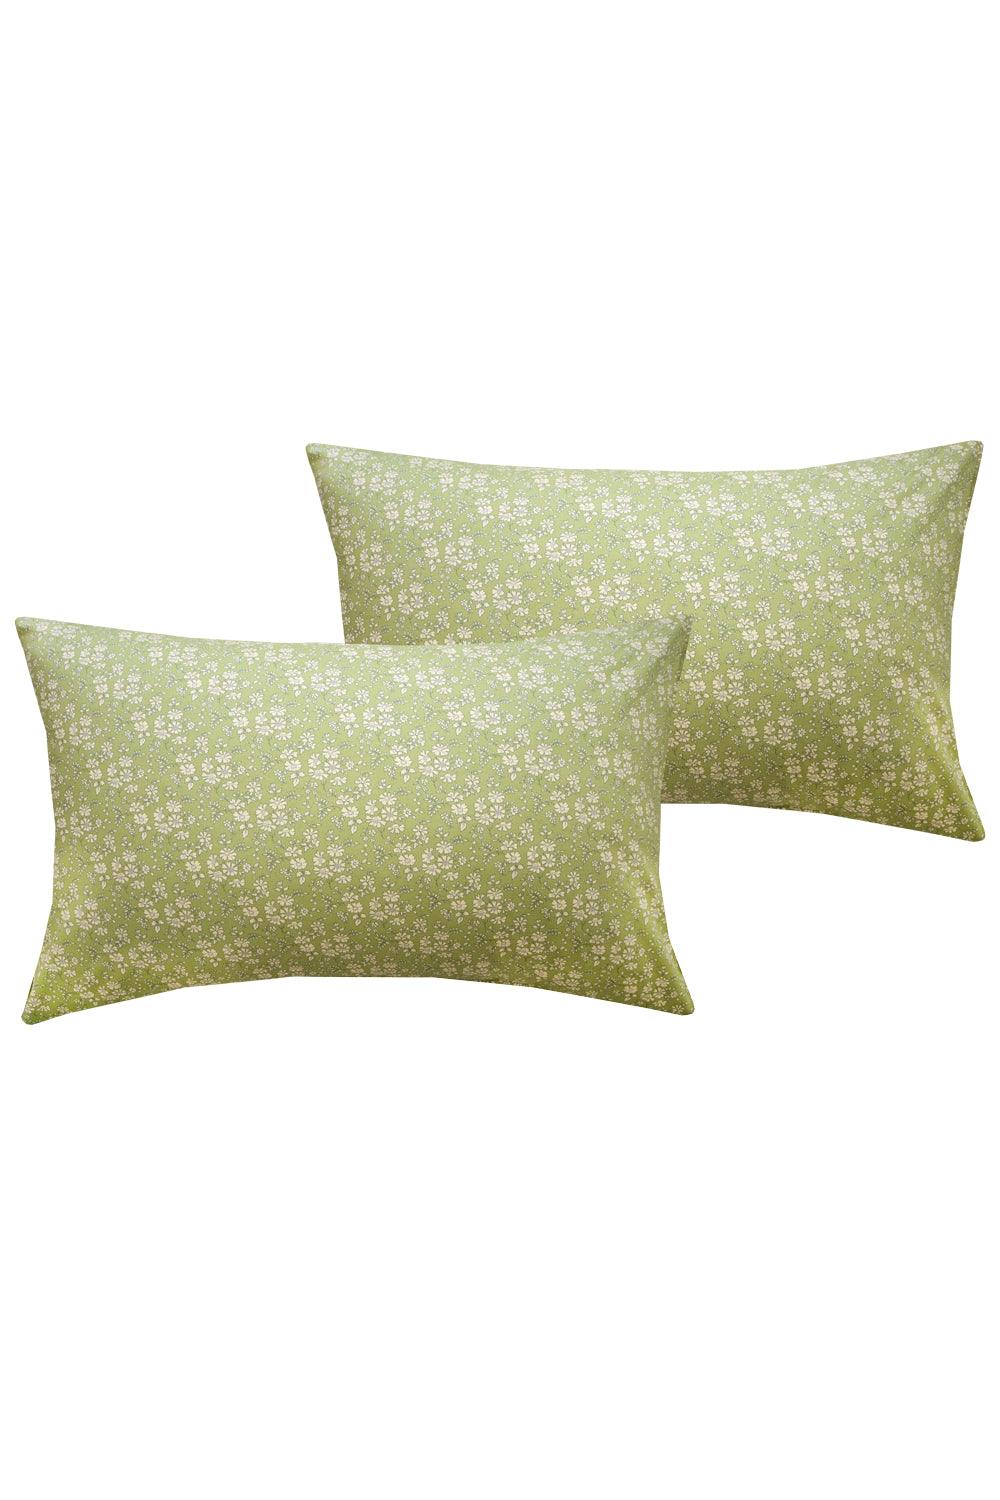 Pillowcase made with Liberty Fabric CAPEL PISTACHIO - Coco & Wolf